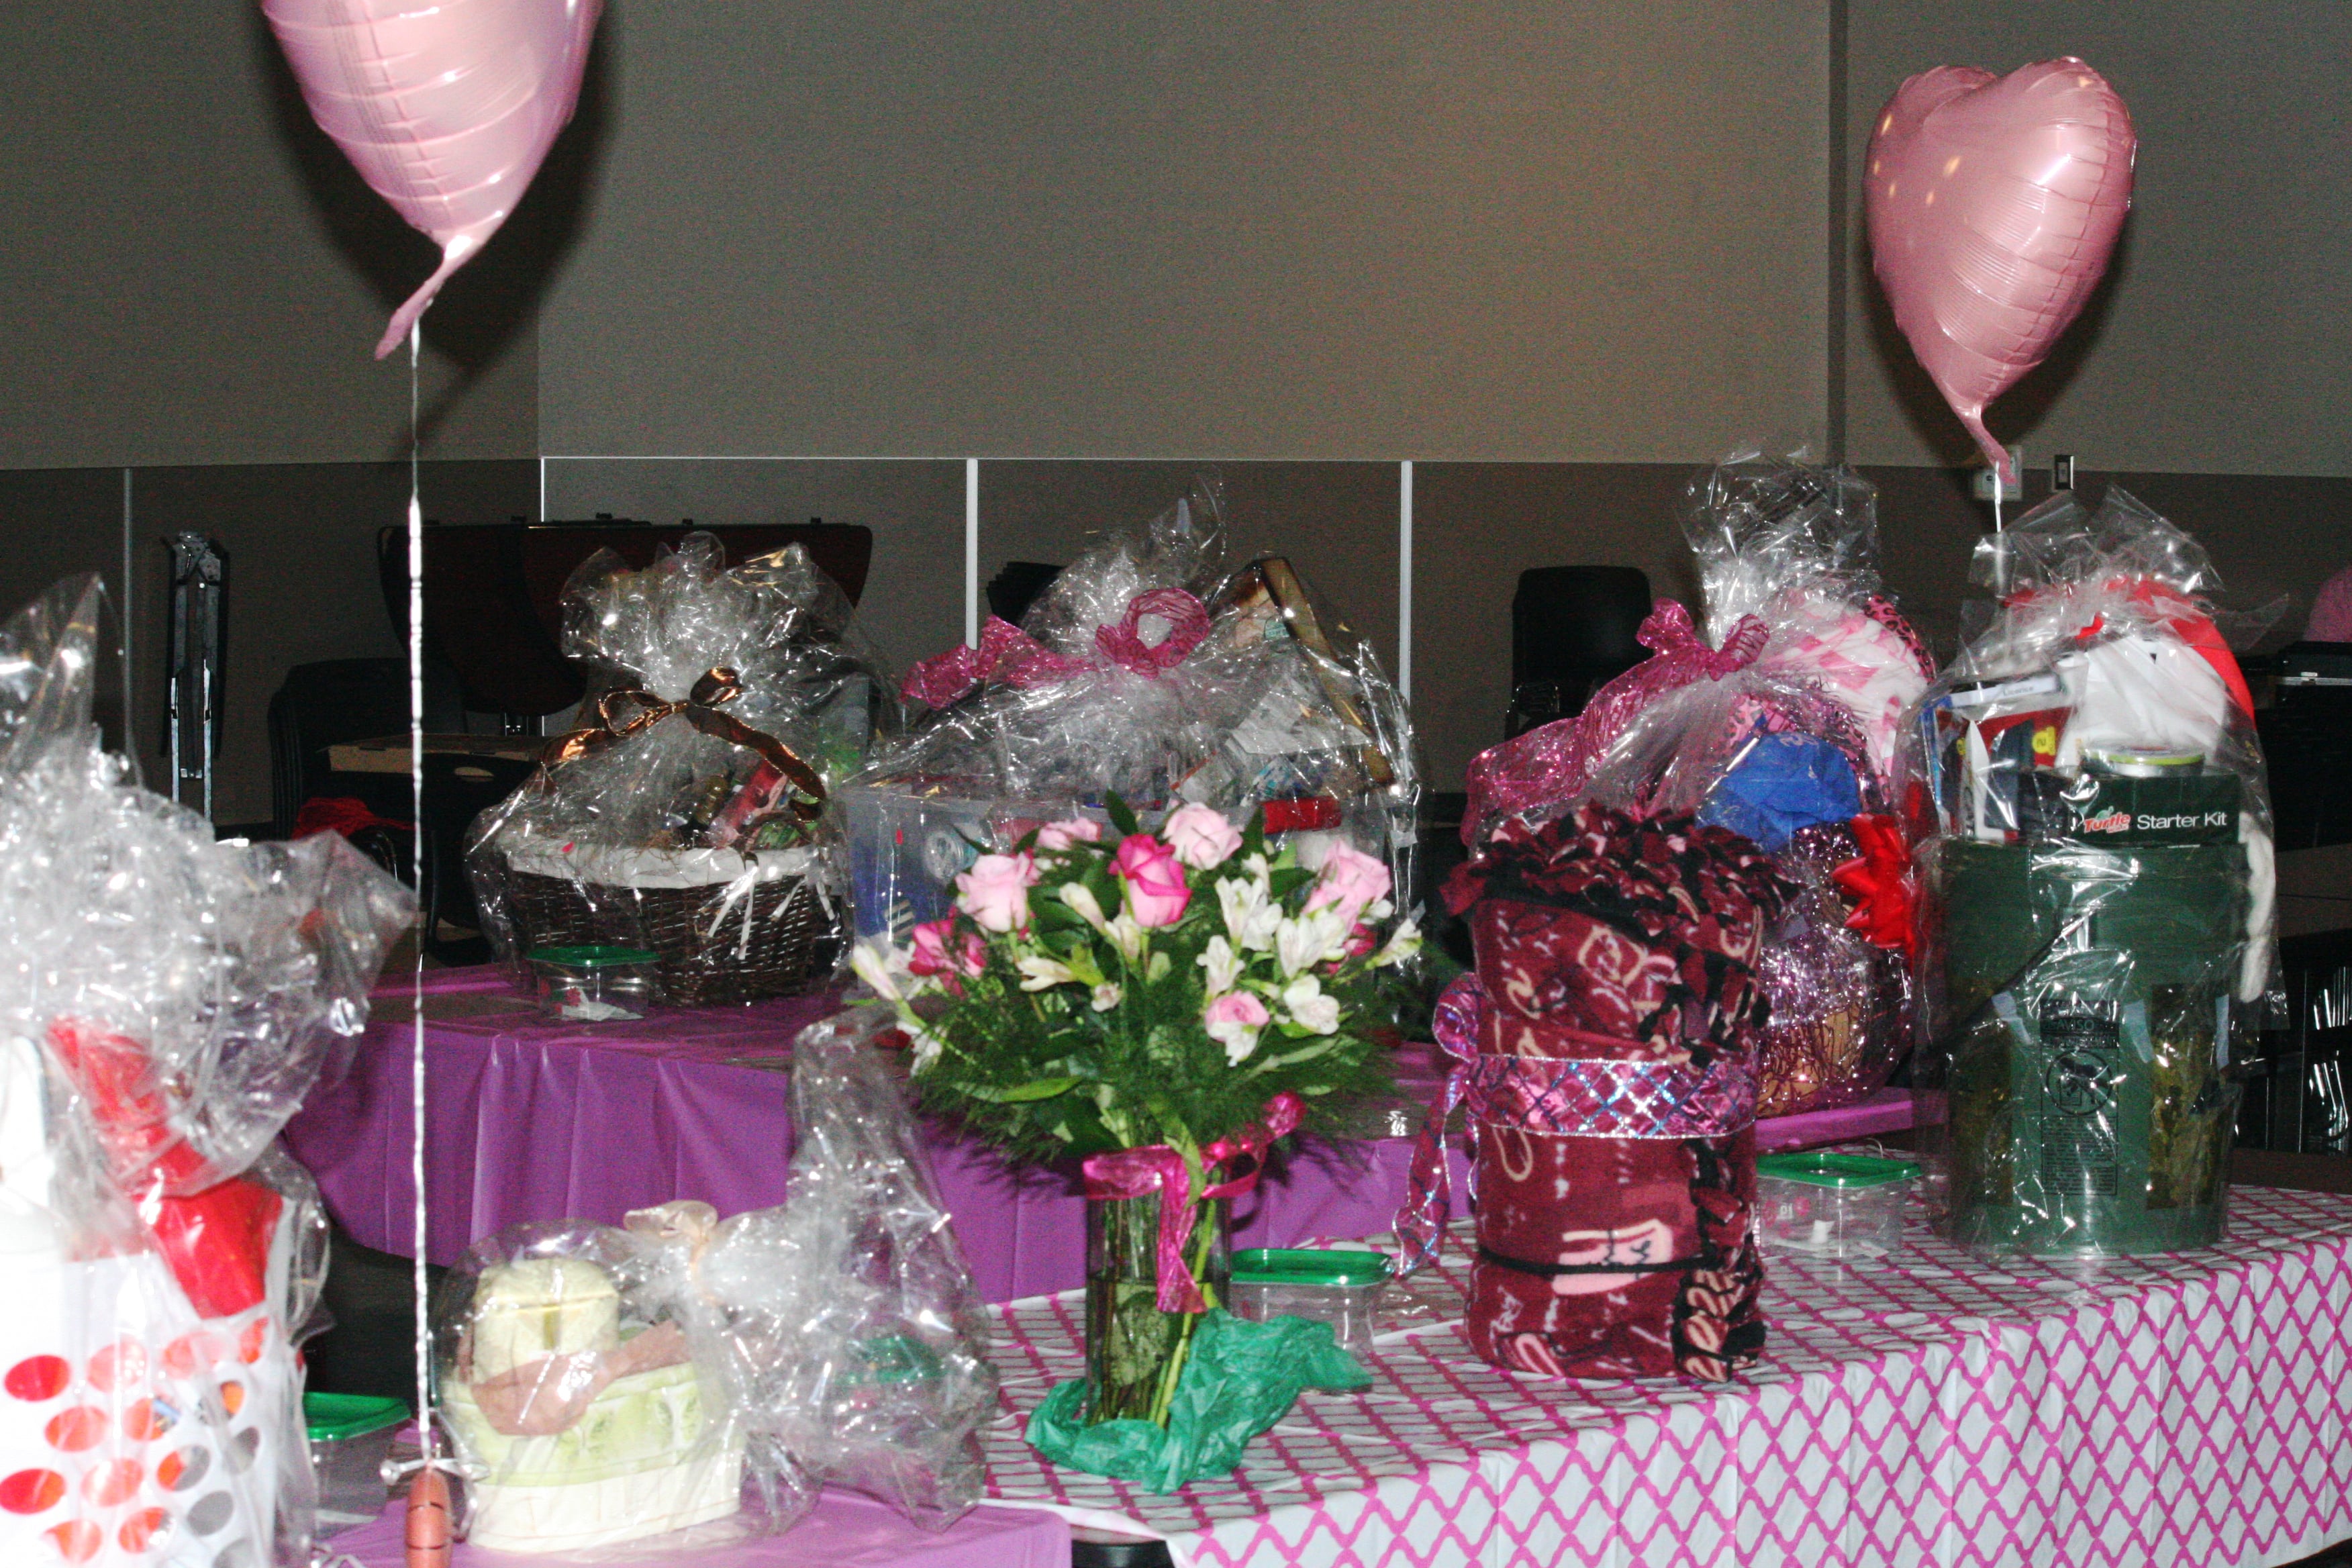 Hoops For Pink donation baskets.